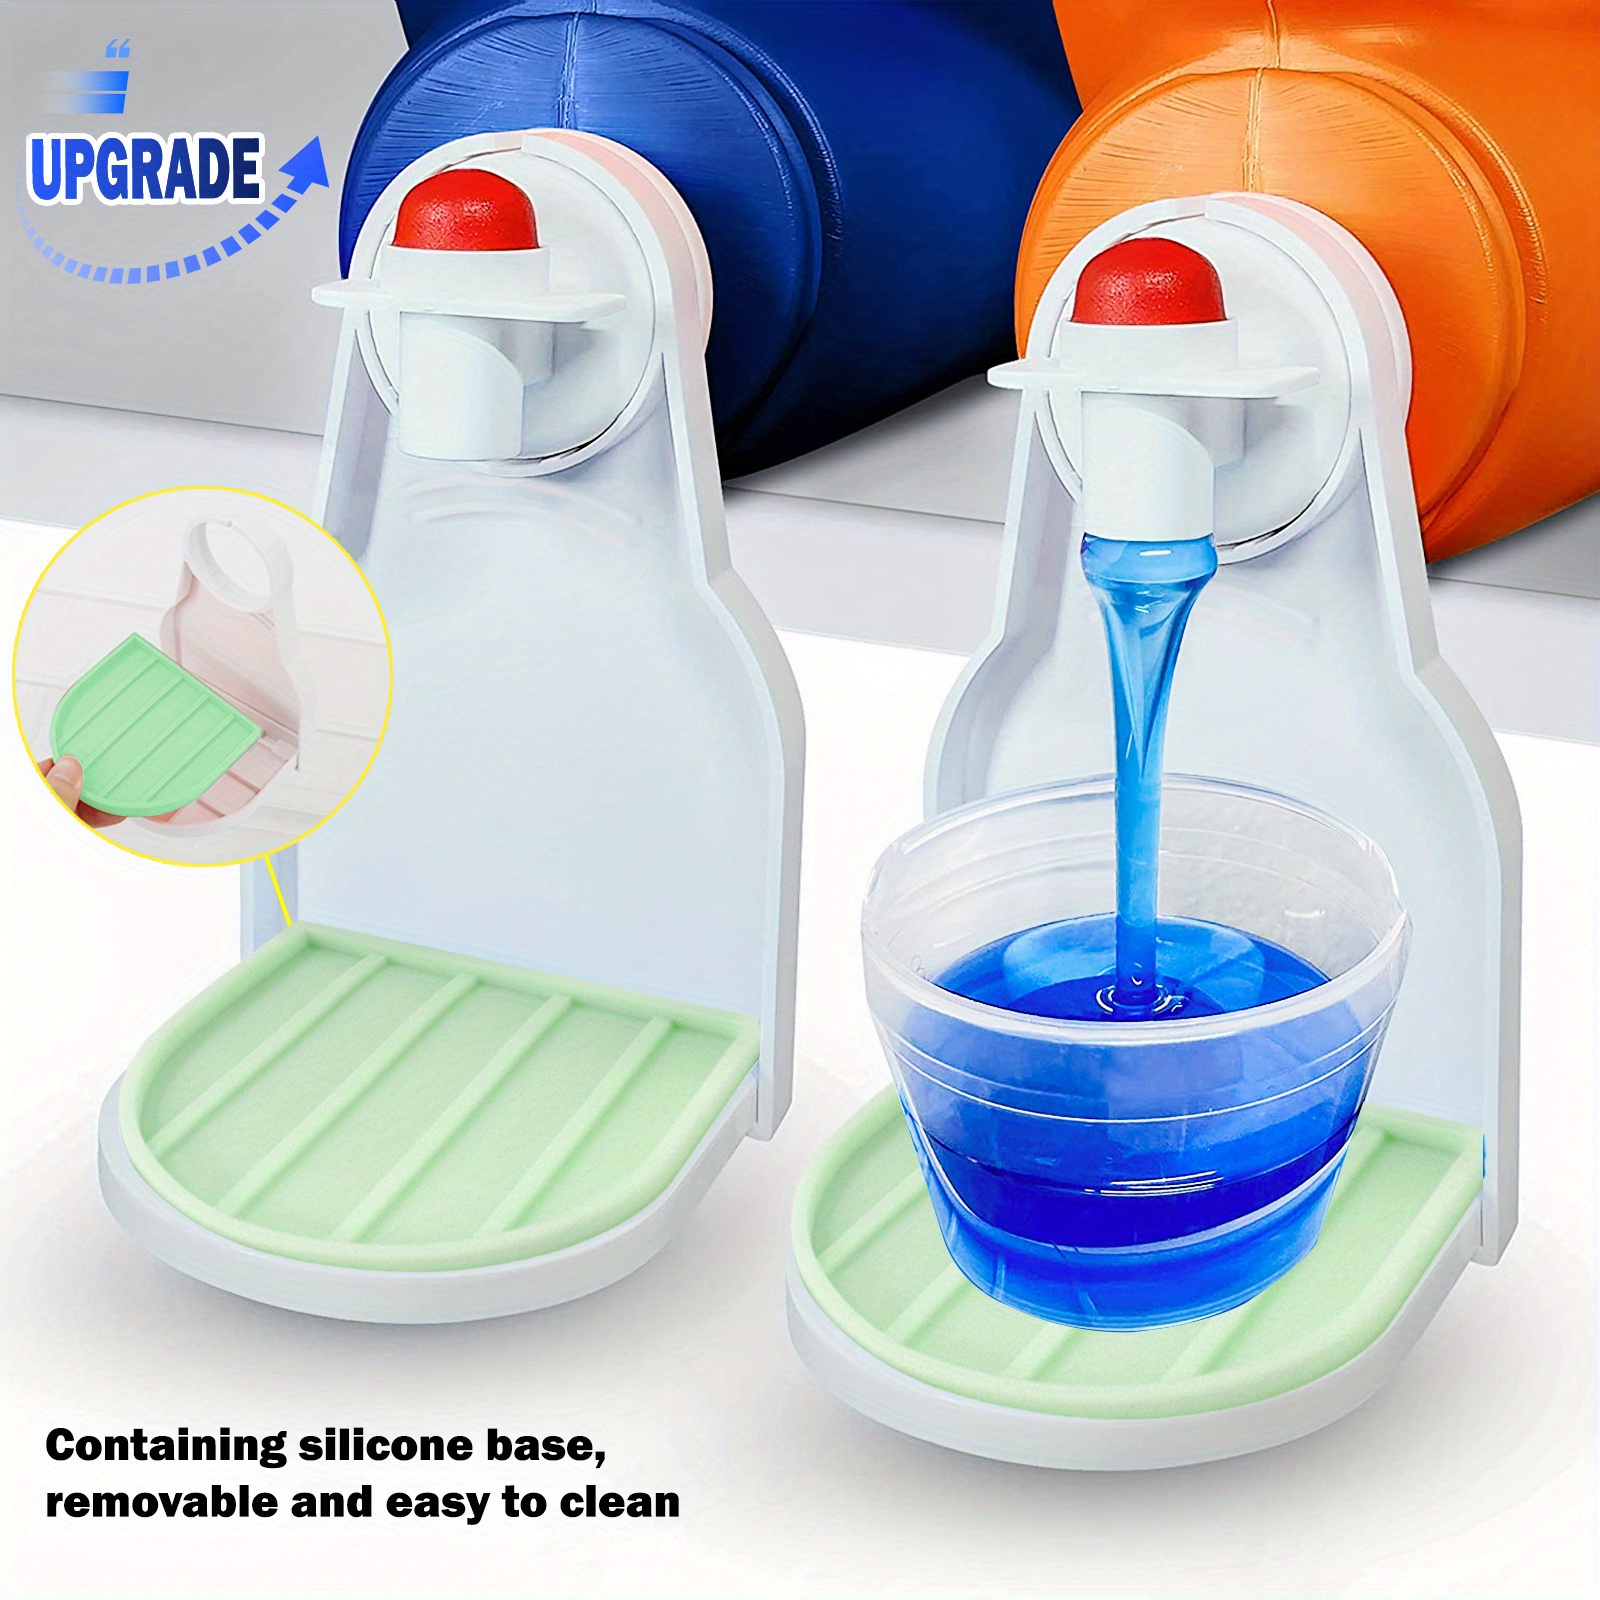 Household Cleaning Set - Powder Detergent